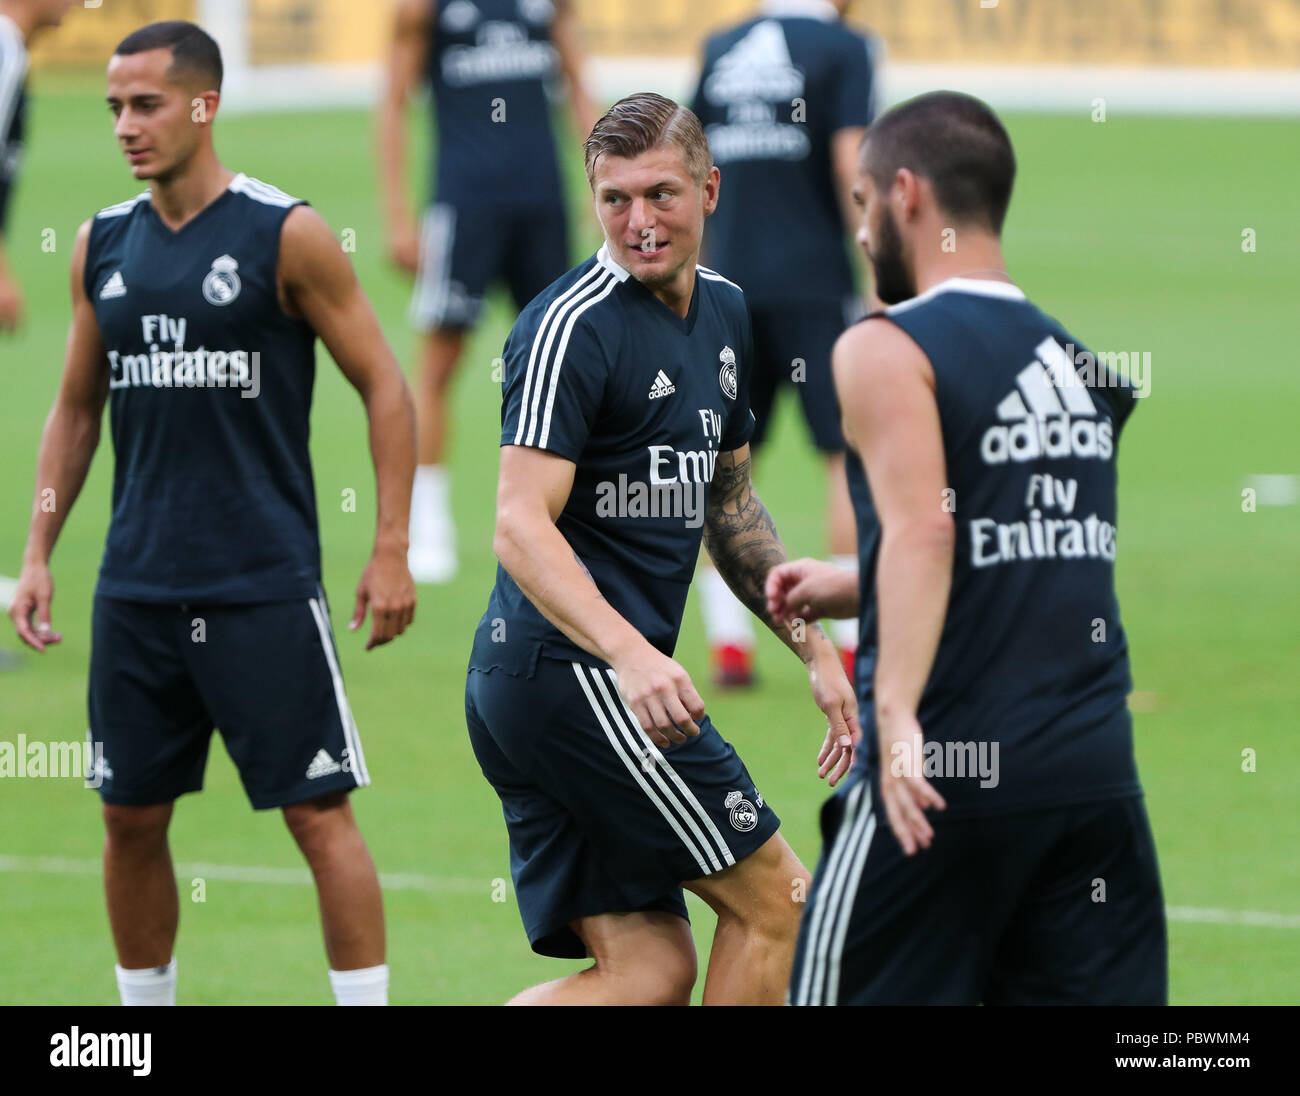 Miami Gardens, Florida, USA. 30th July, 2018. Real Madrid C.F. midfielder Toni Kroos in action (center) during a team's open training session for the International Champions Cup match between Real Madrid C.F. and Manchester United F.C. at the Hard Rock Stadium in Miami Gardens, Florida. Credit: Mario Houben/ZUMA Wire/Alamy Live News Stock Photo